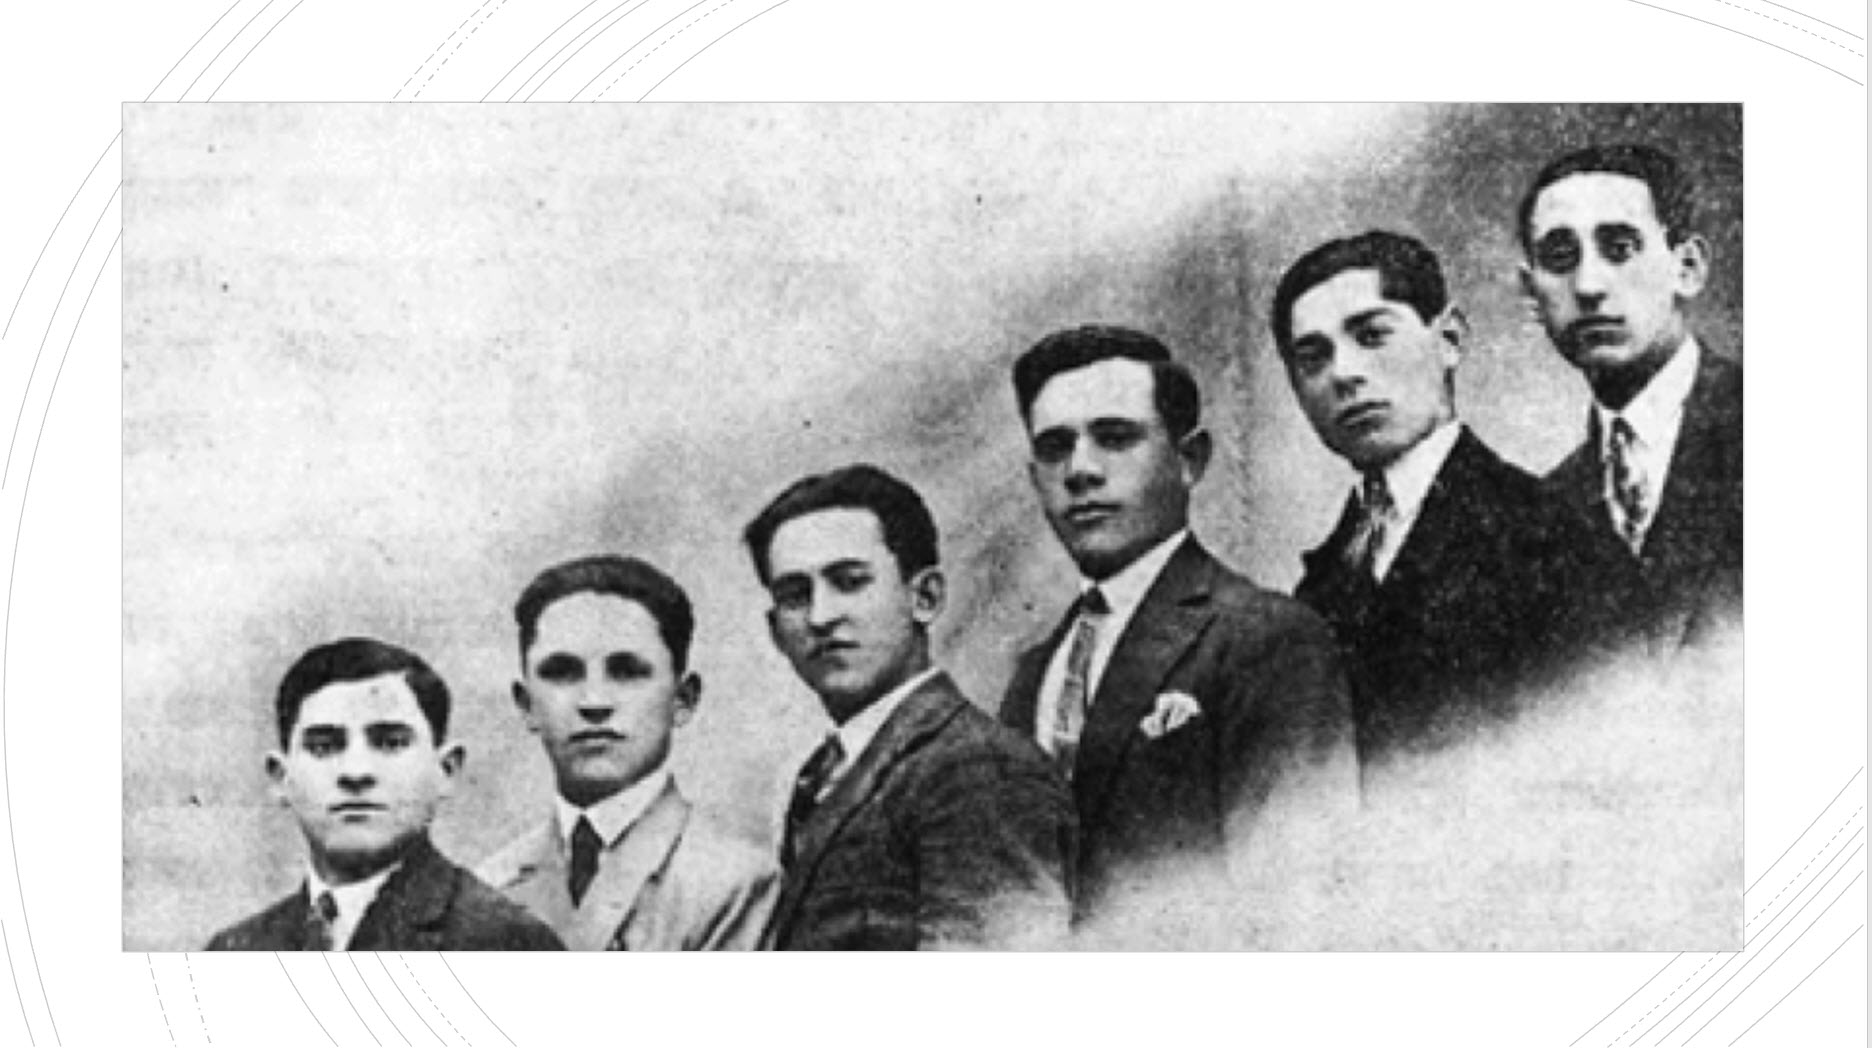 A group of young men from Mlynov. 